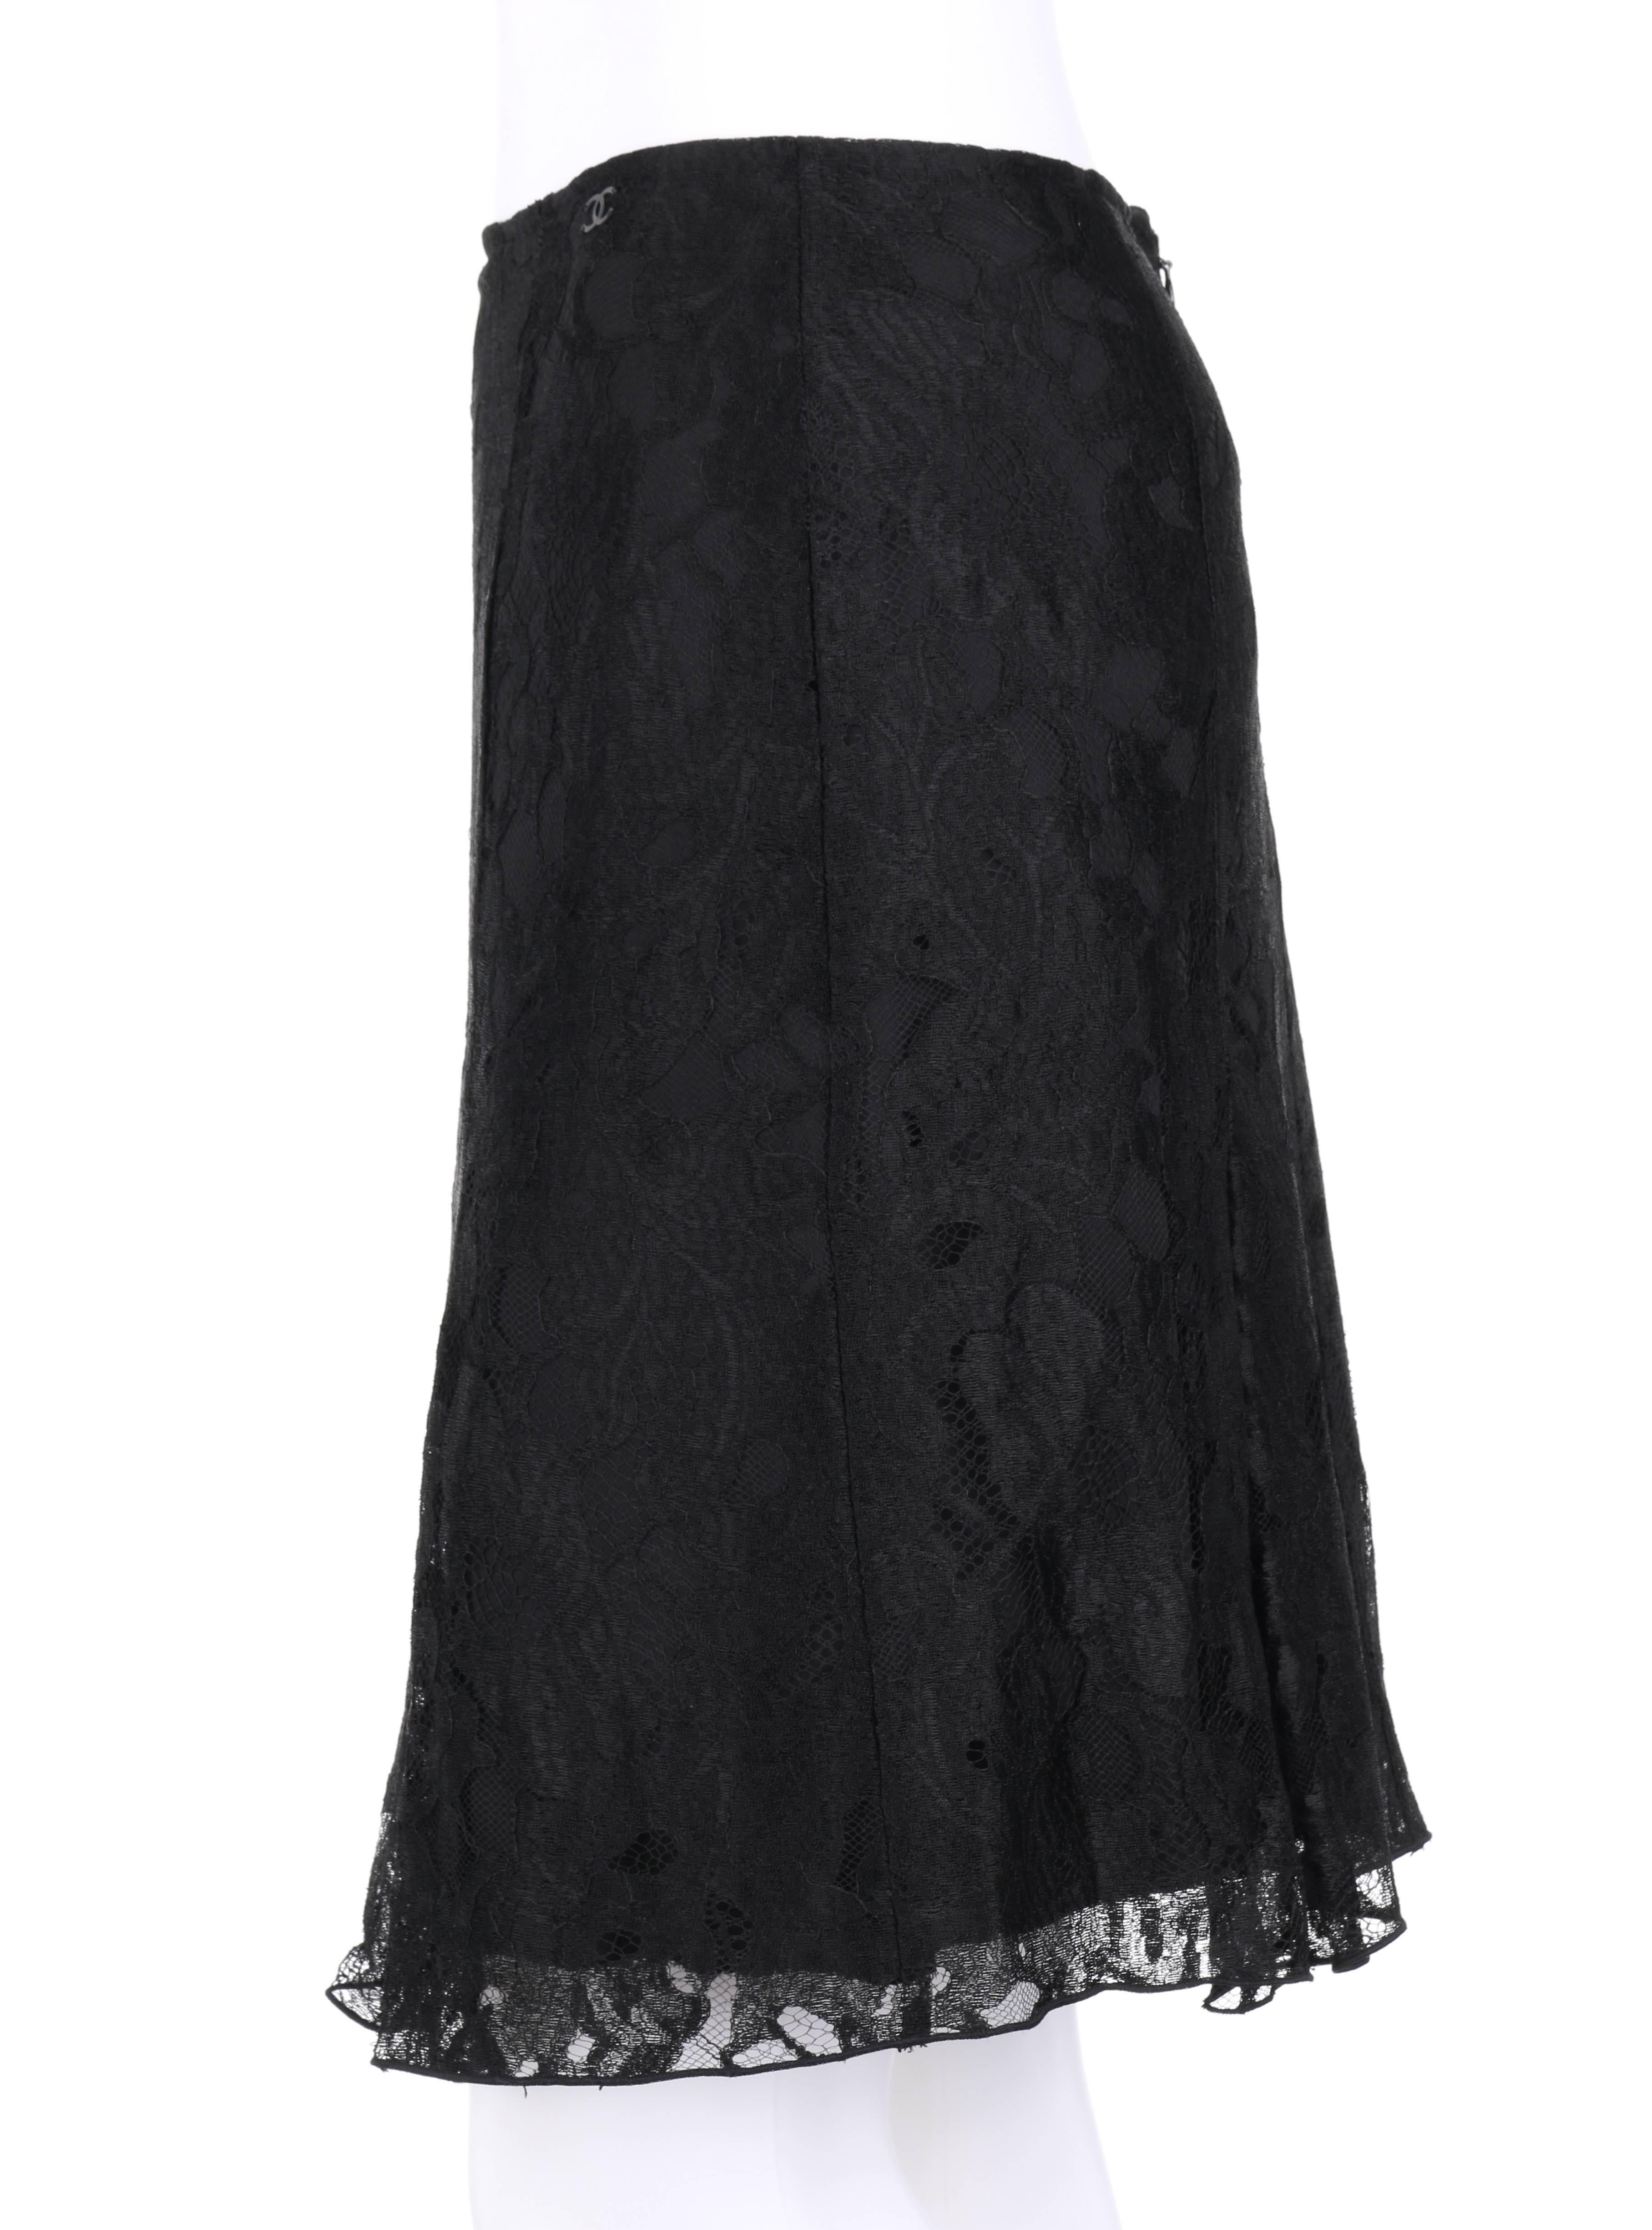 CHANEL A/W 2006 Black Floral Lace Box Pleated Skirt  1